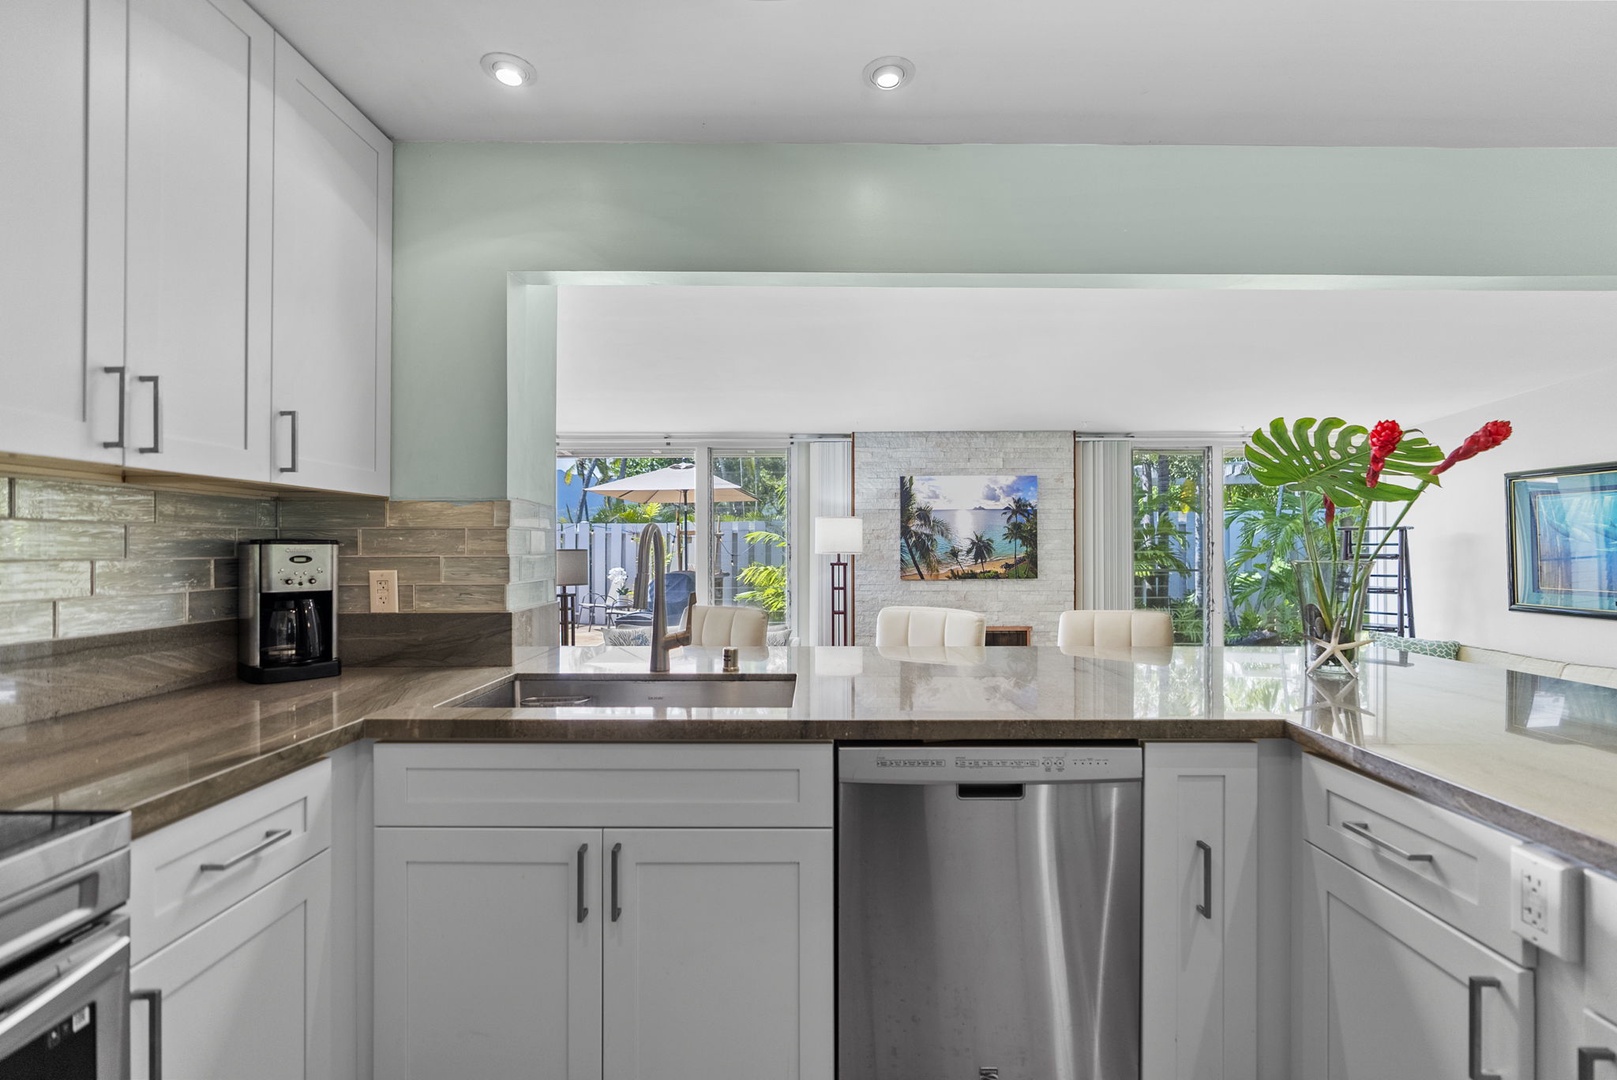 Kailua Vacation Rentals, Hale Aloha - Expansive counter space awaits your culinary creativity in this well-appointed kitchen.